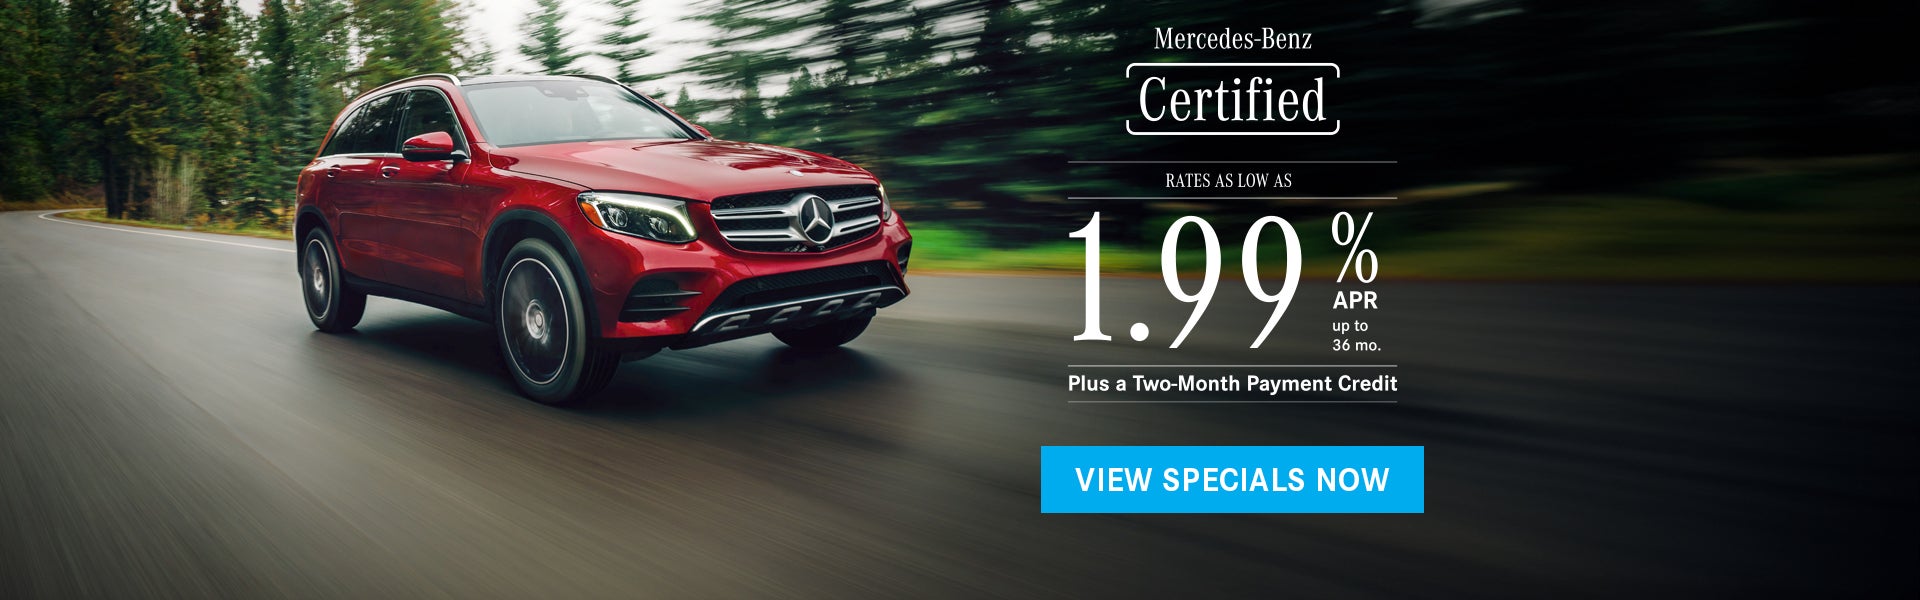 1.99% APR on Mercedes-Benz Certified Pre-Owned